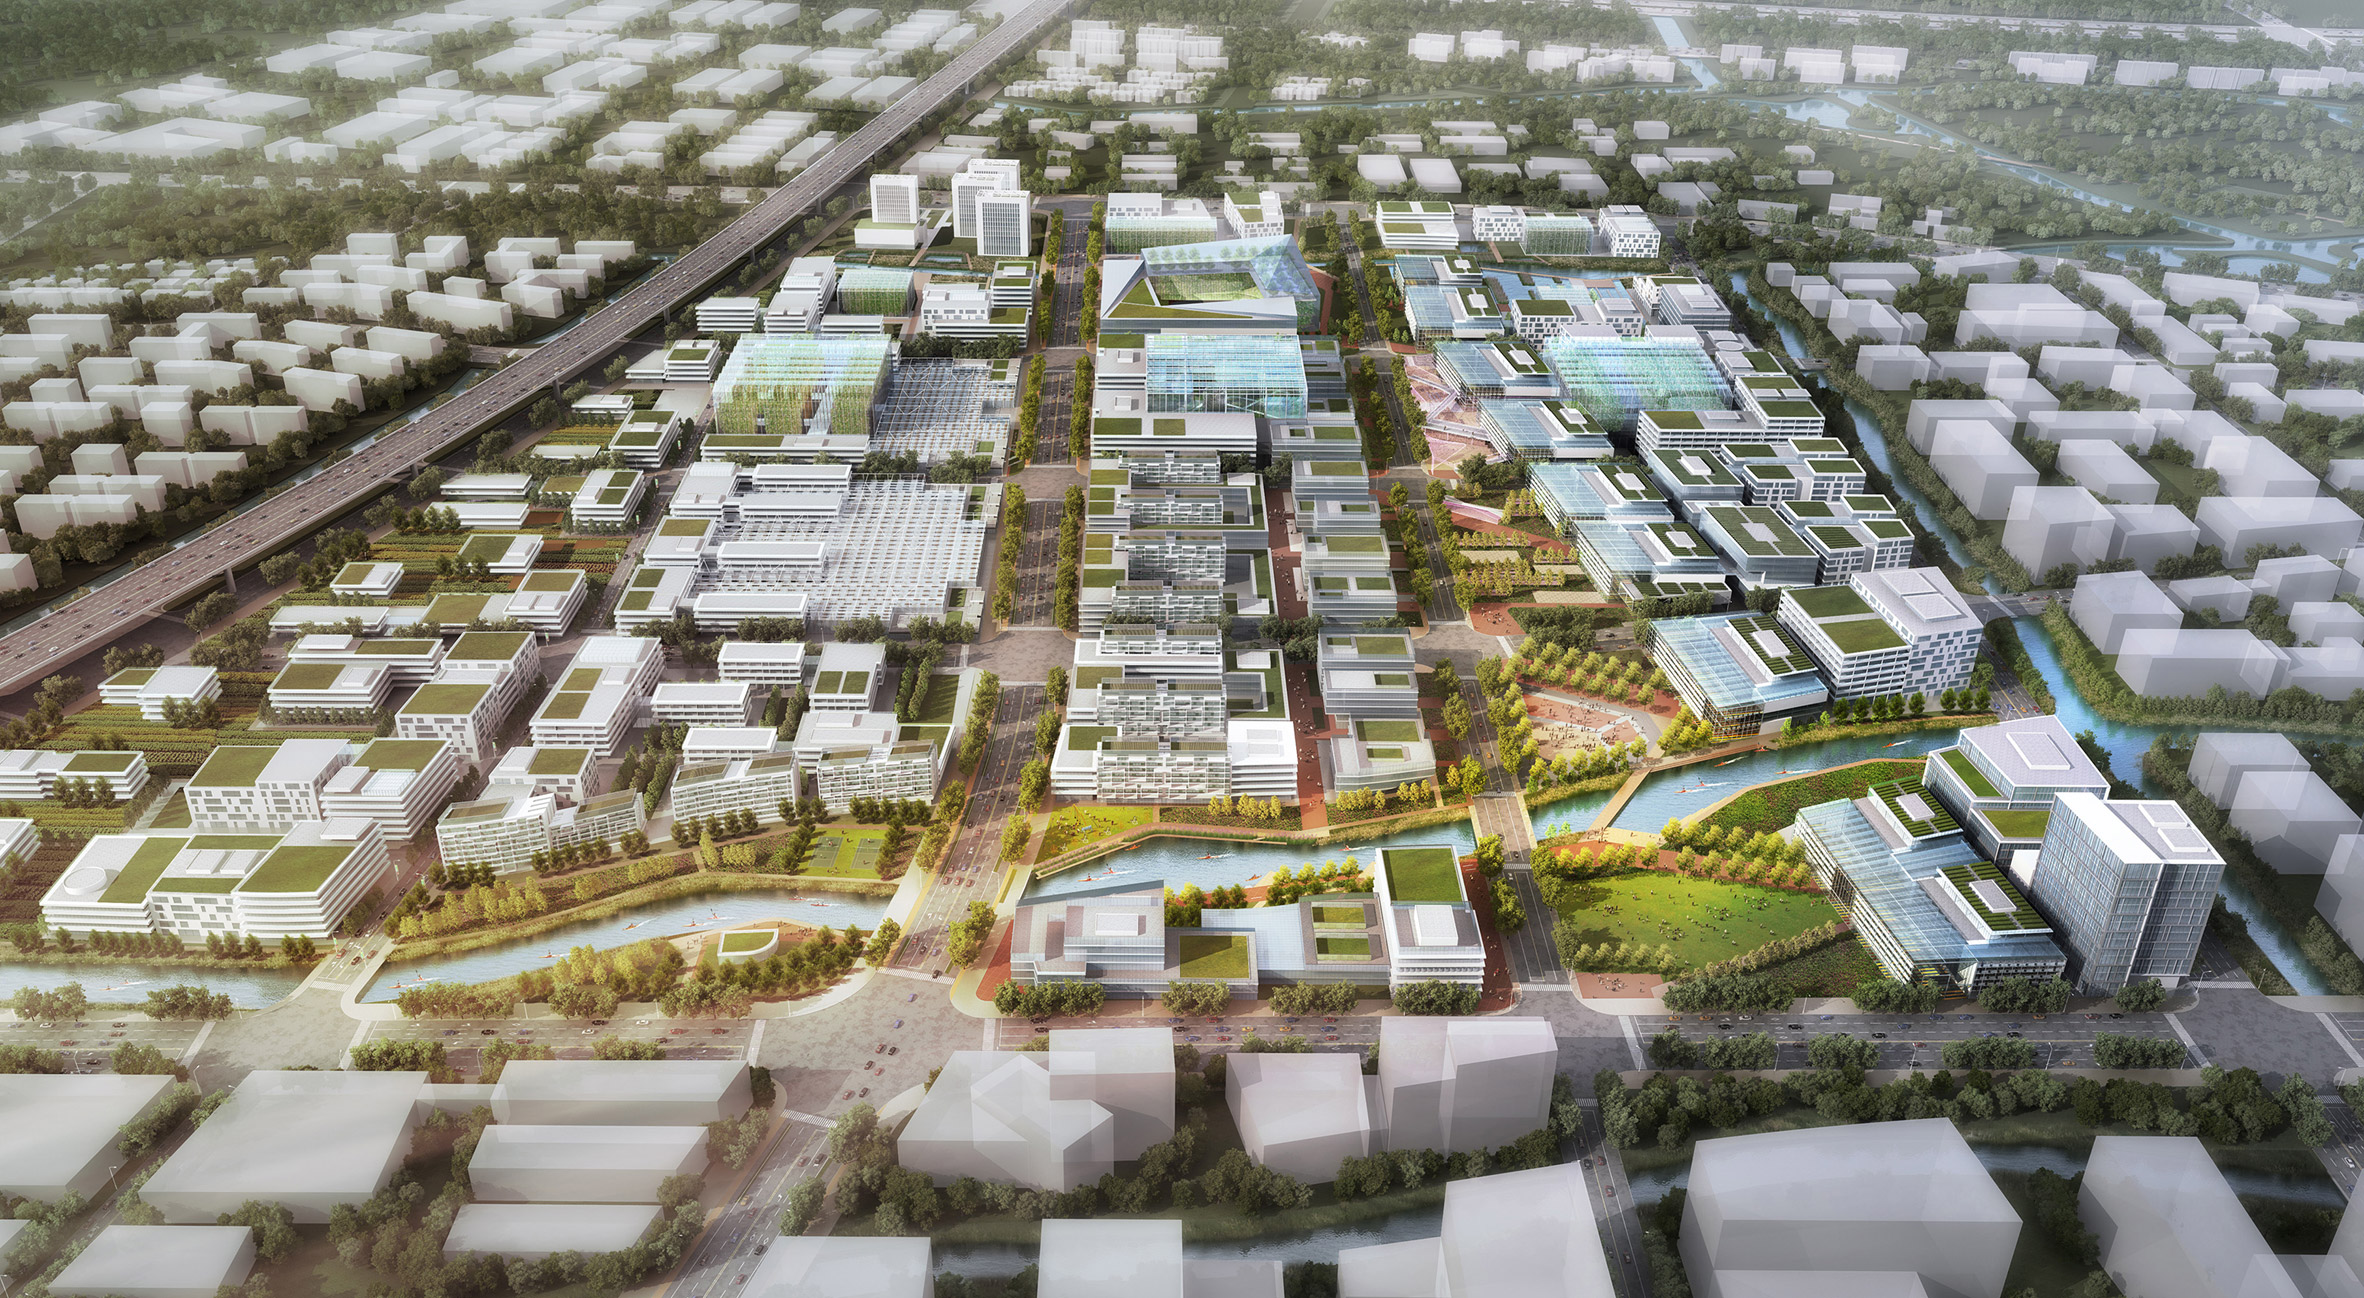 Sasaki's plans for Sunqiao Urban Agricultural District in Shanghai